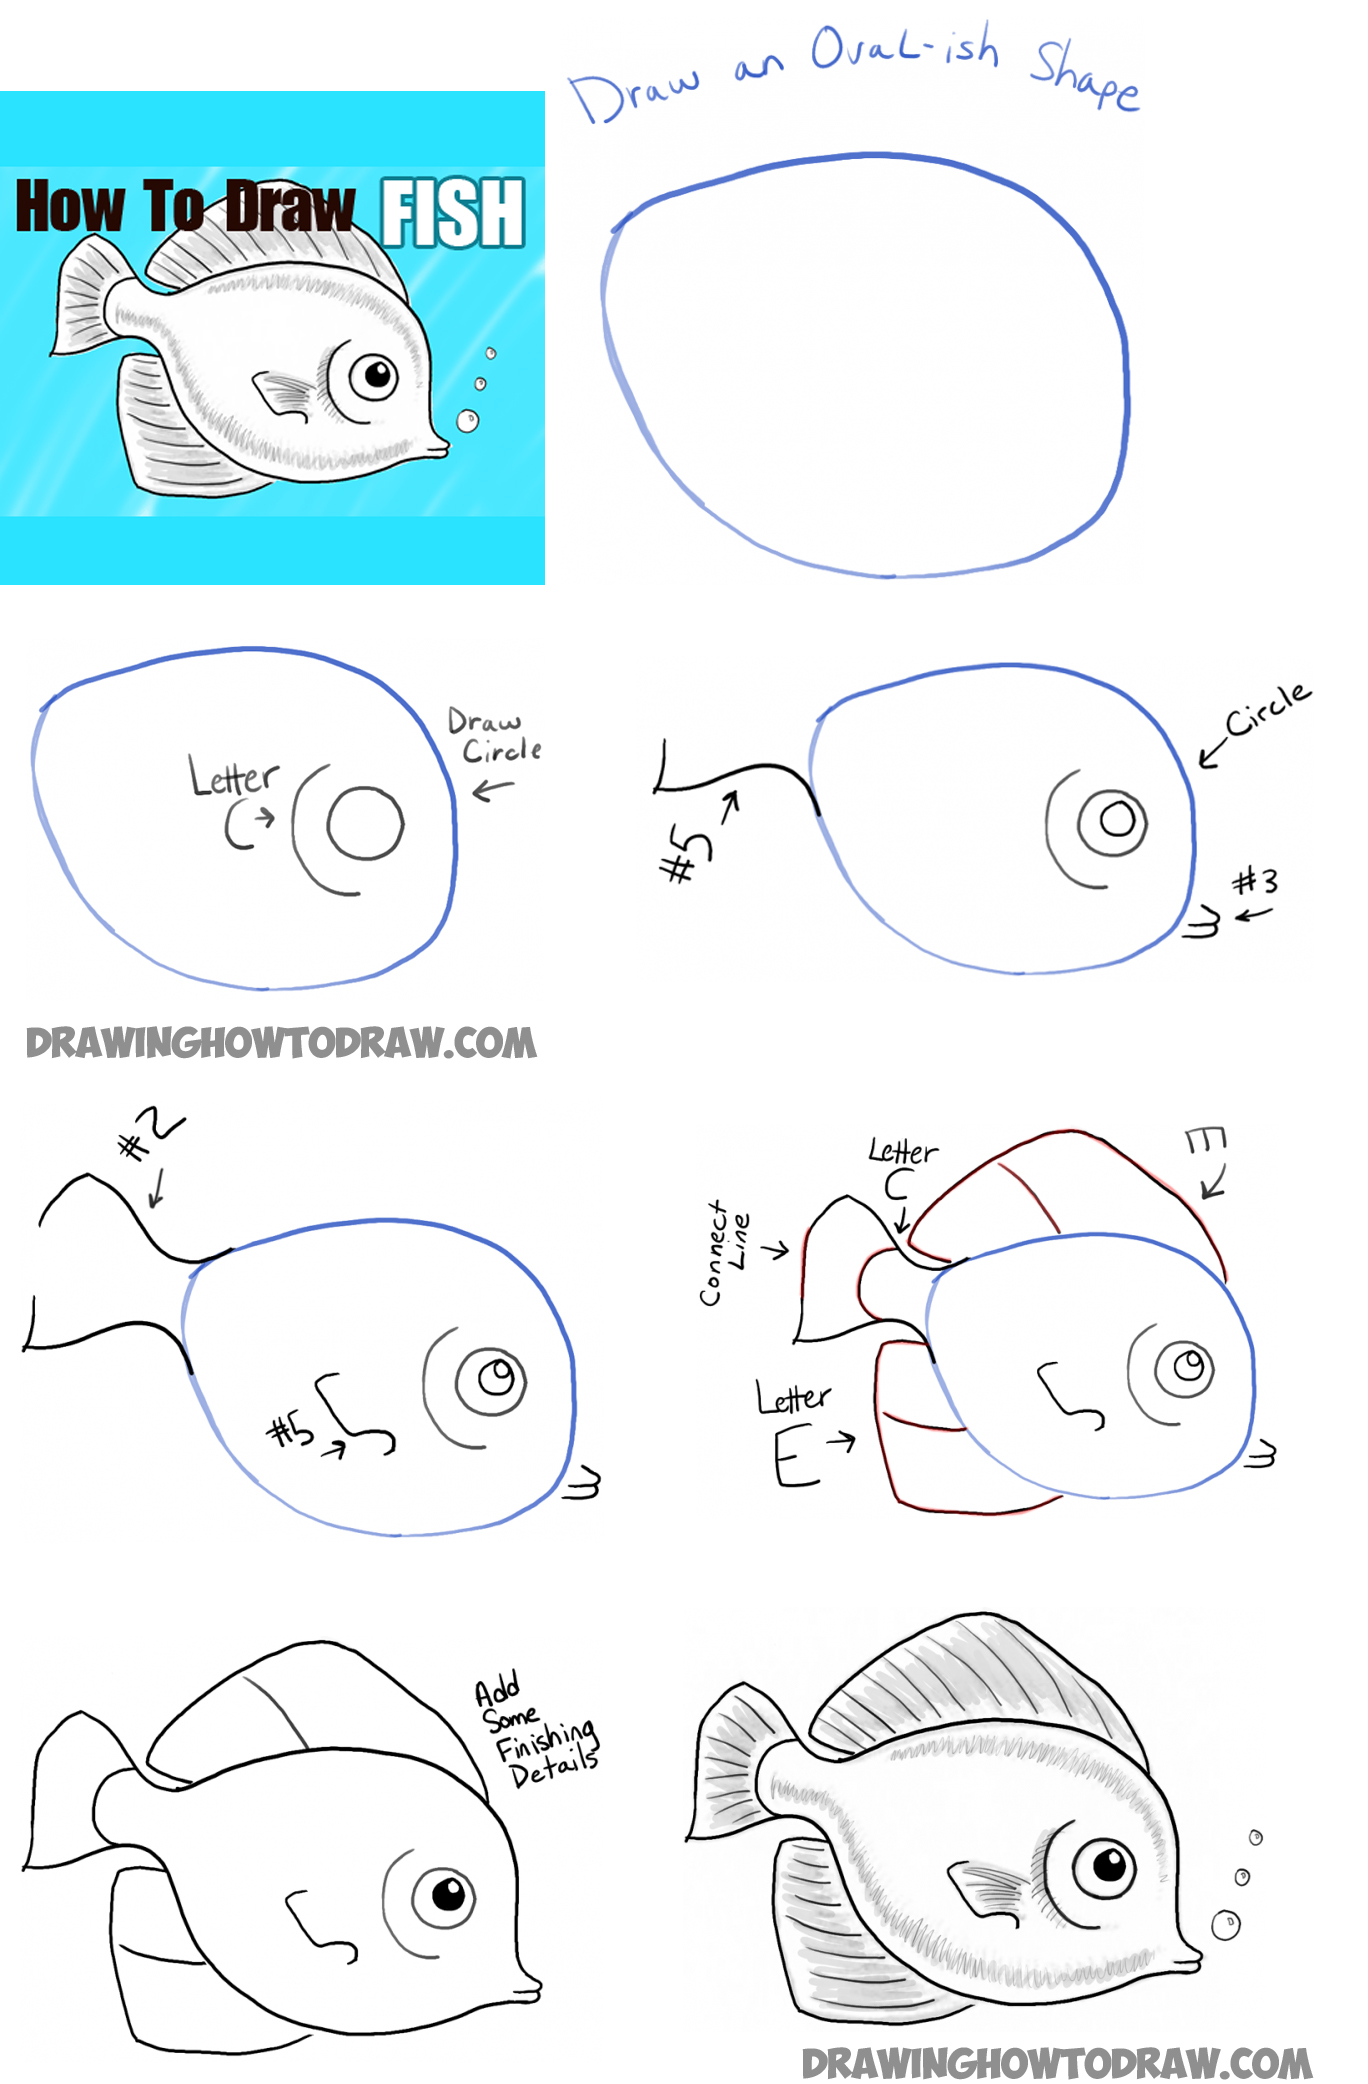 How to Draw a Fish. Geometric Shapes, Primary & Secondary Colors | Draw &  Learn with ABCDrawings.com